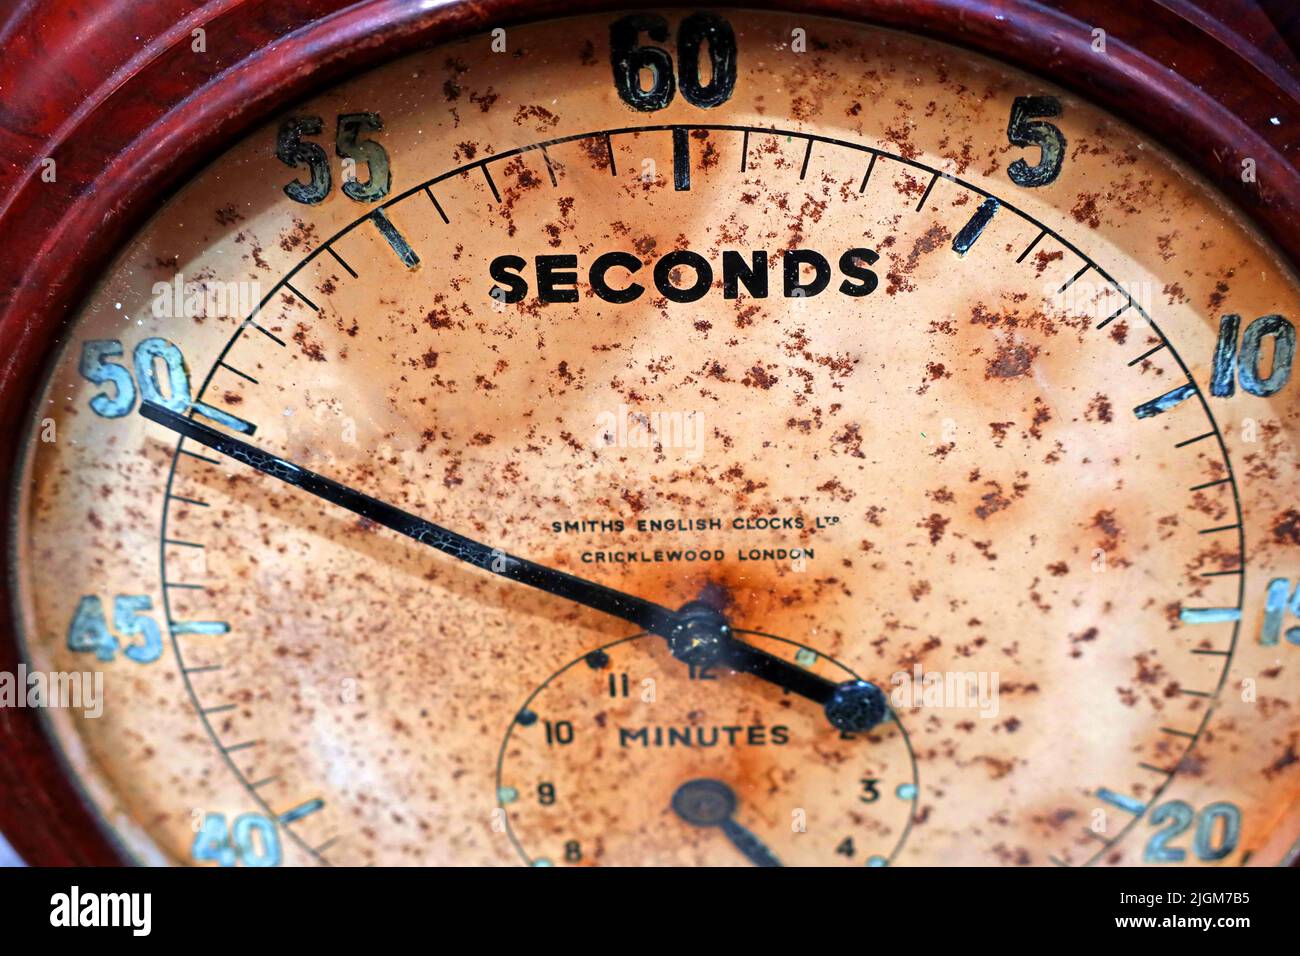 Seconds - Smiths English Clocks, Cricklewood London, distressed dial ,shallow focus Stock Photo